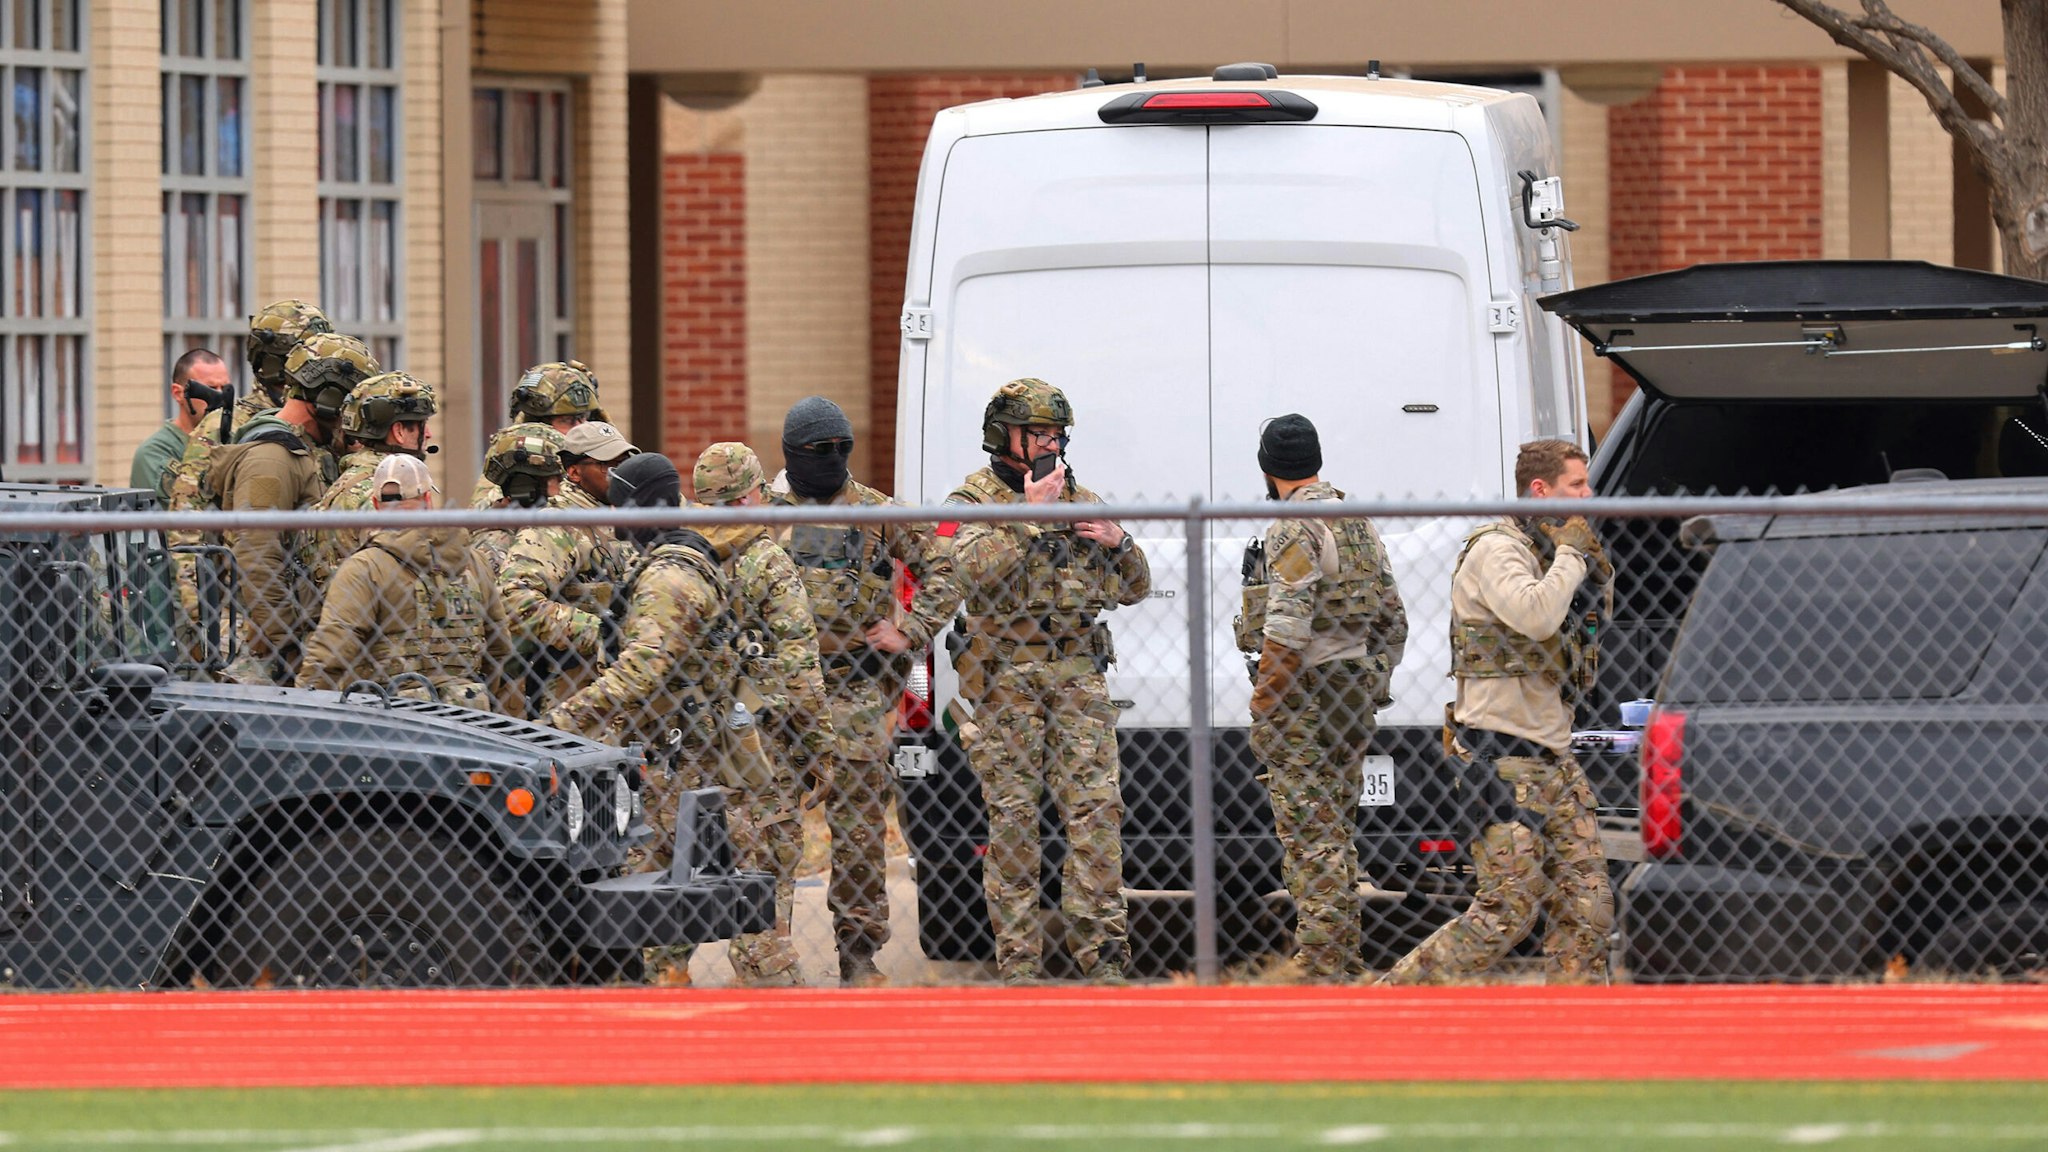 SWAT team members deploy near the Congregation Beth Israel Synagogue in Colleyville, Texas, some 25 miles (40 kilometers) west of Dallas, on January 15, 2022. - The SWAT police operation was underway at the synagogue where a man claiming to be the brother of a convicted terrorist has reportedly taken several people hostage, police and media said.